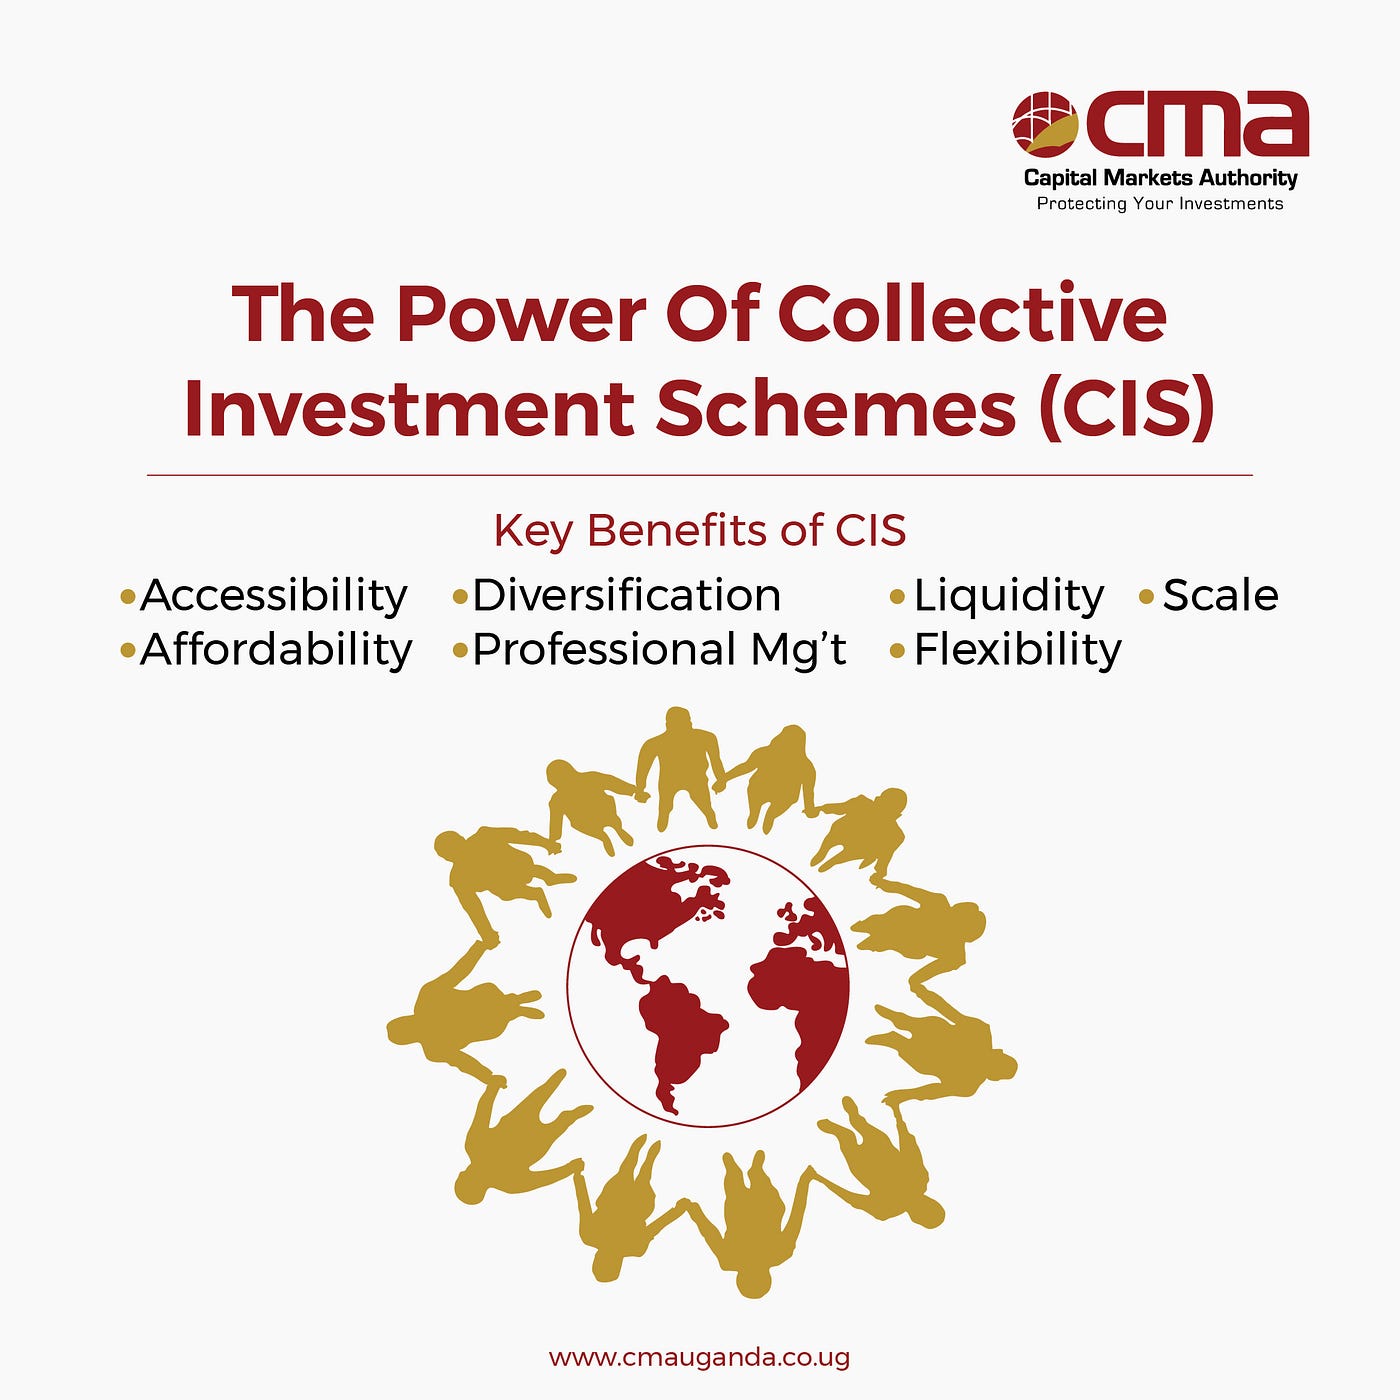 The Power of Collective Investment Schemes (CIS) | by CMA Uganda | Medium